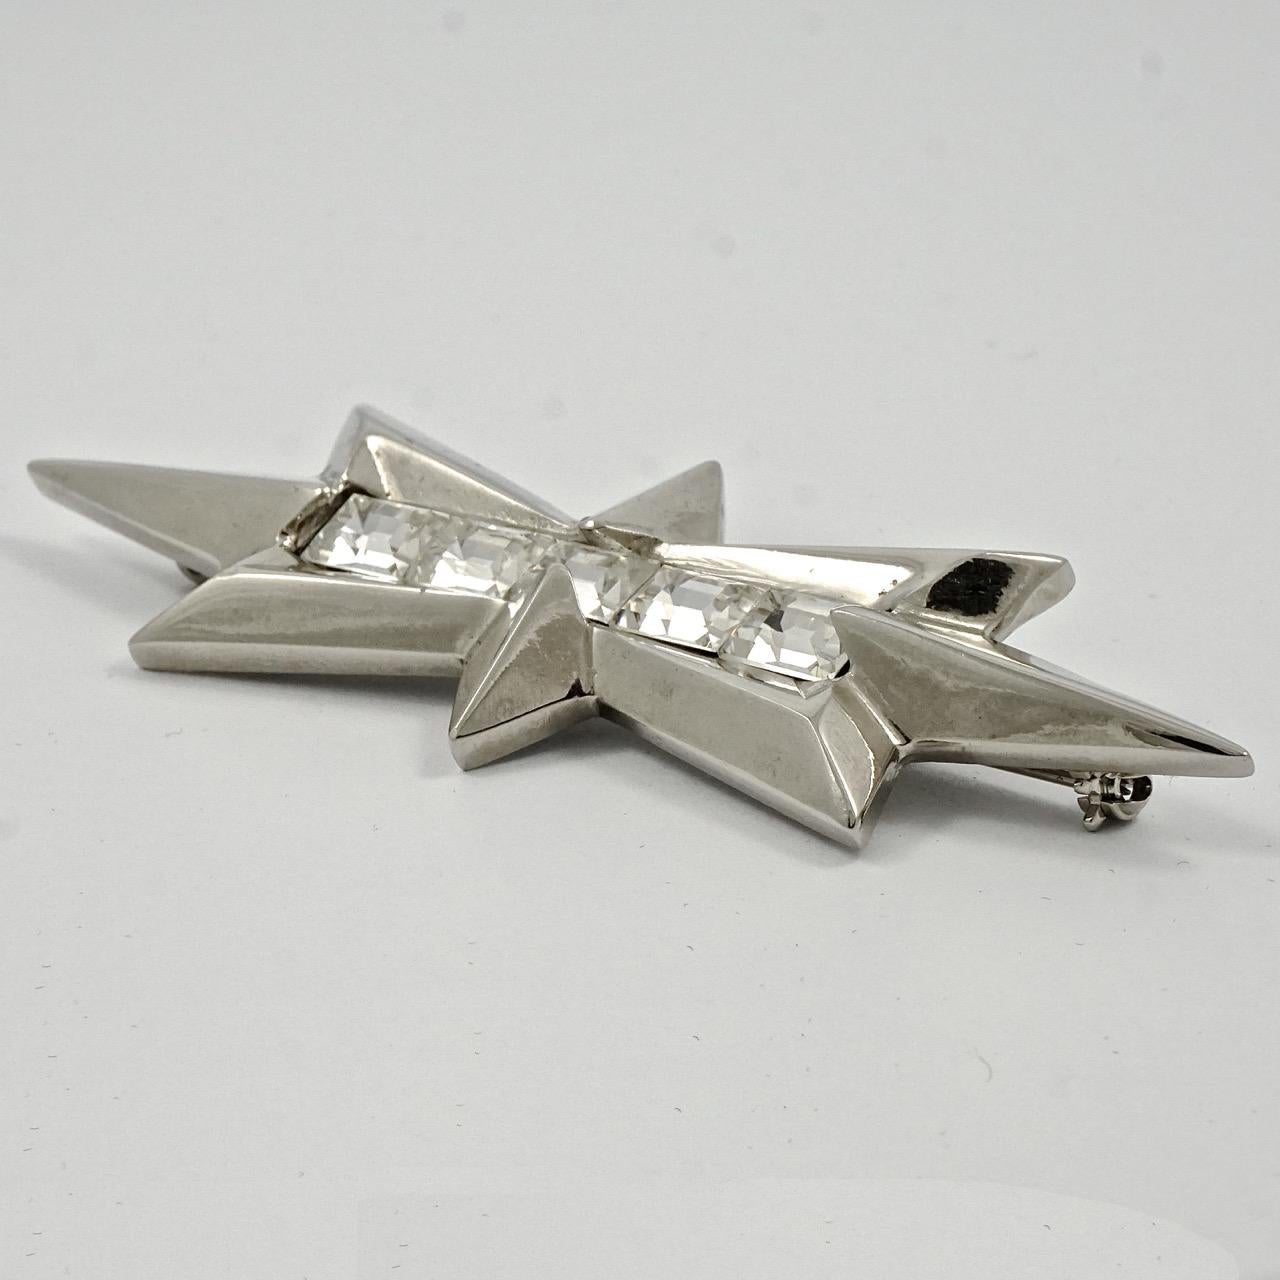 Beautiful Thierry Mugler silver tone star brooch, featuring four lovely emerald cut rhinestones. Measuring length 9.1cm / 3.6 inches by width 2.8cm / 1.1 inch. The brooch is in very good condition.

This is a wonderful star statement brooch by